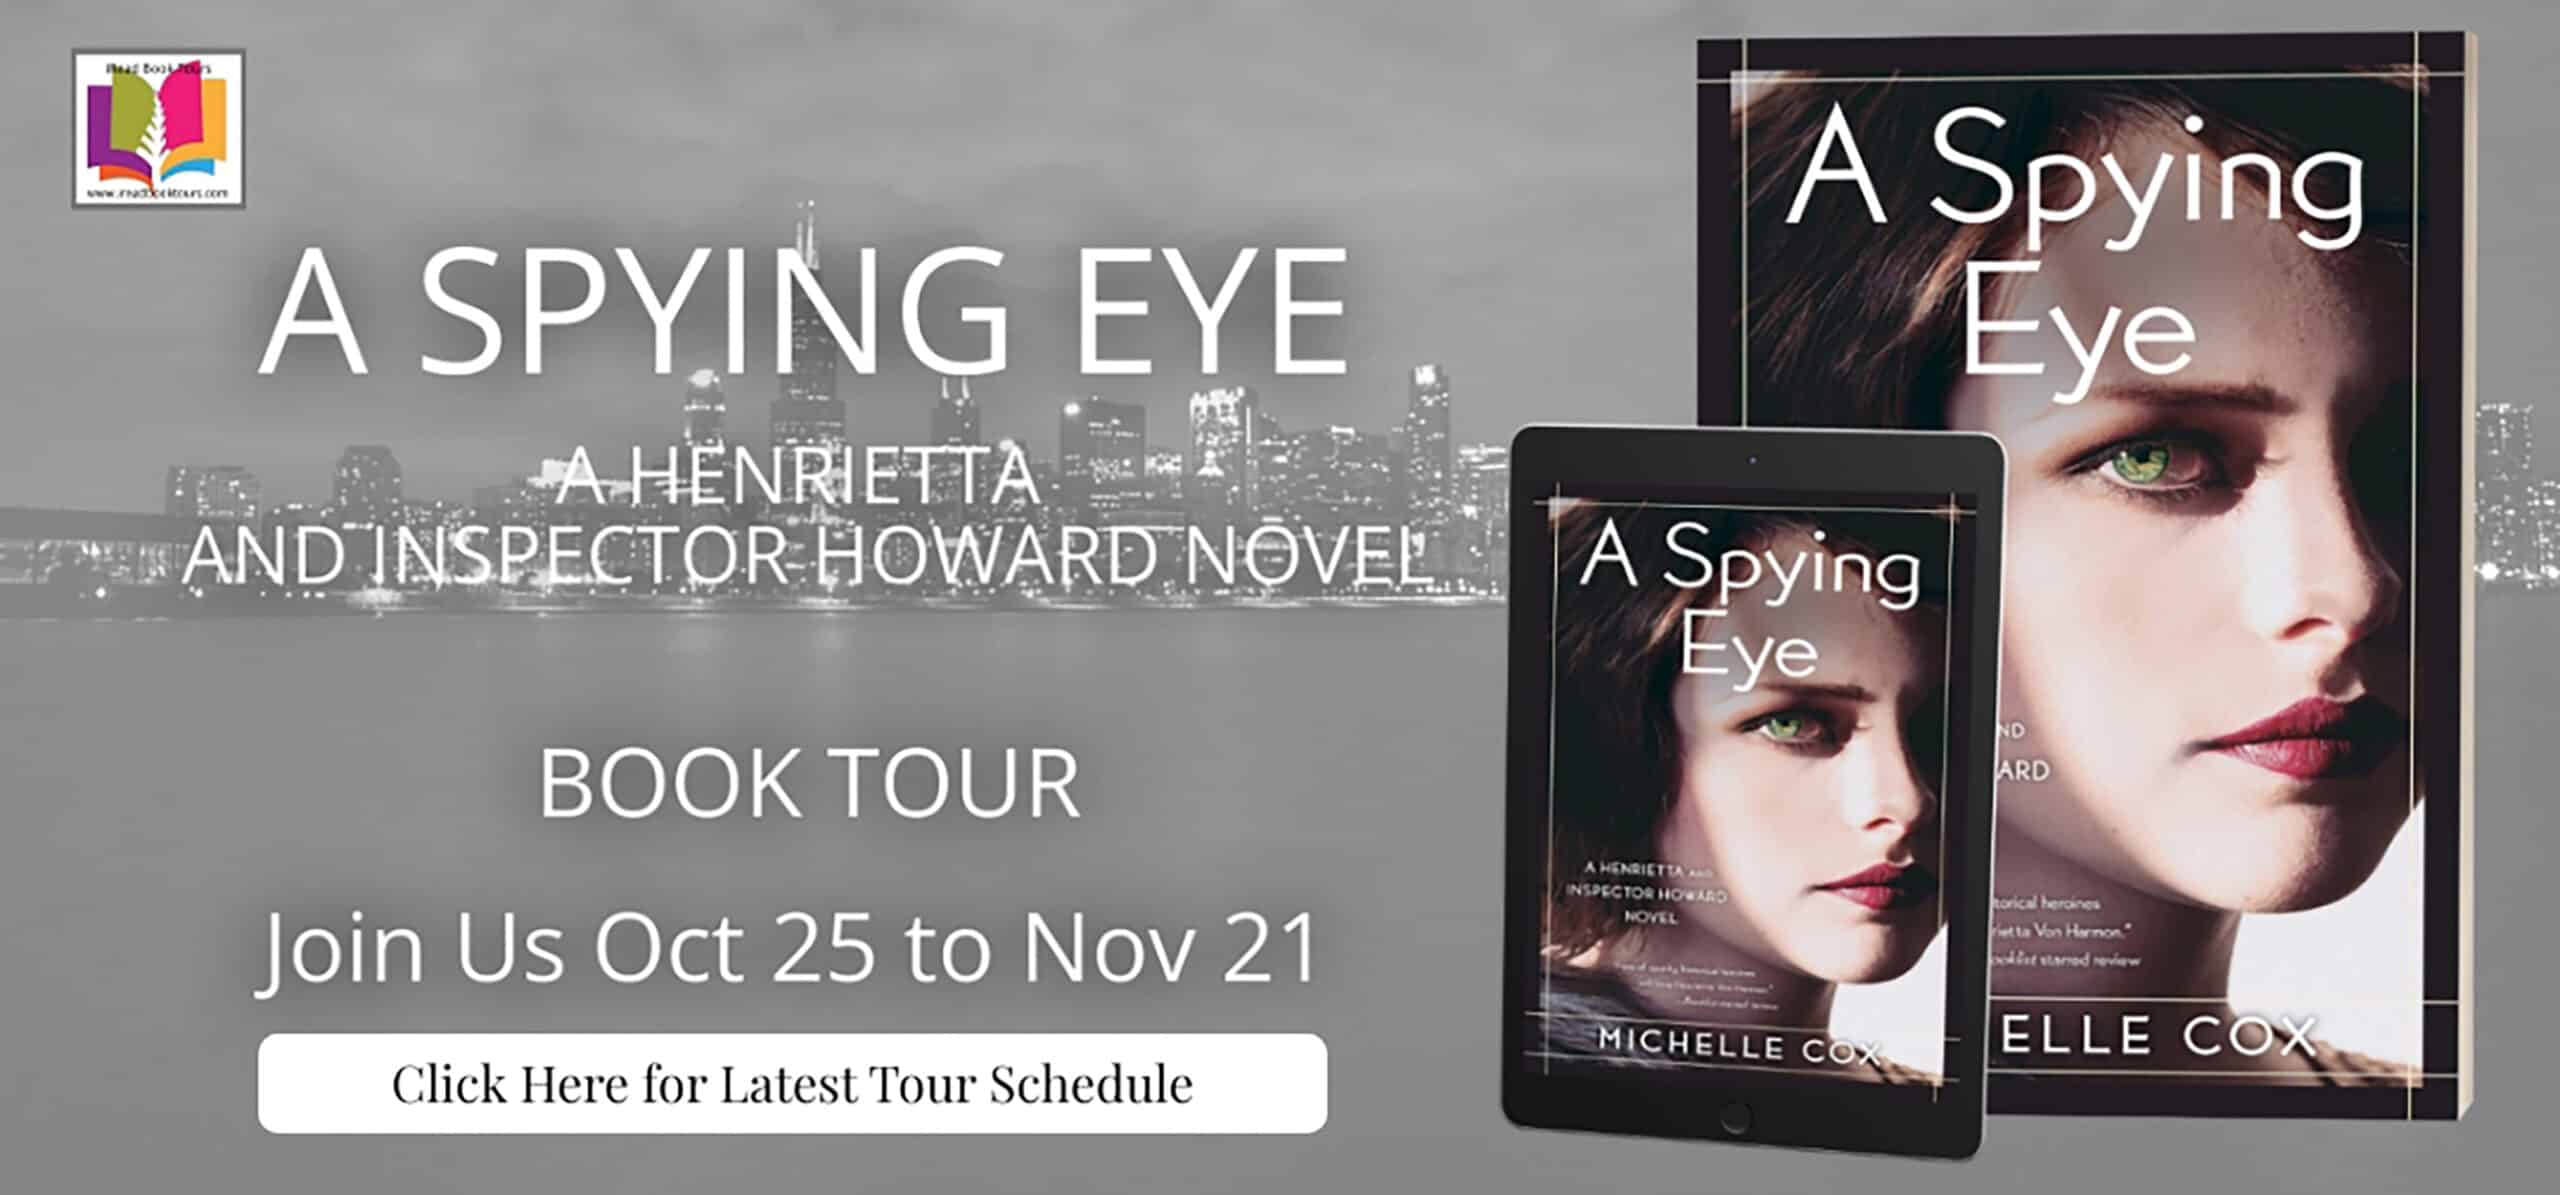 A Spying Eye: A Henrietta and Inspector Howard Novel by Michelle Cox | Book Review - $150 Giveaway